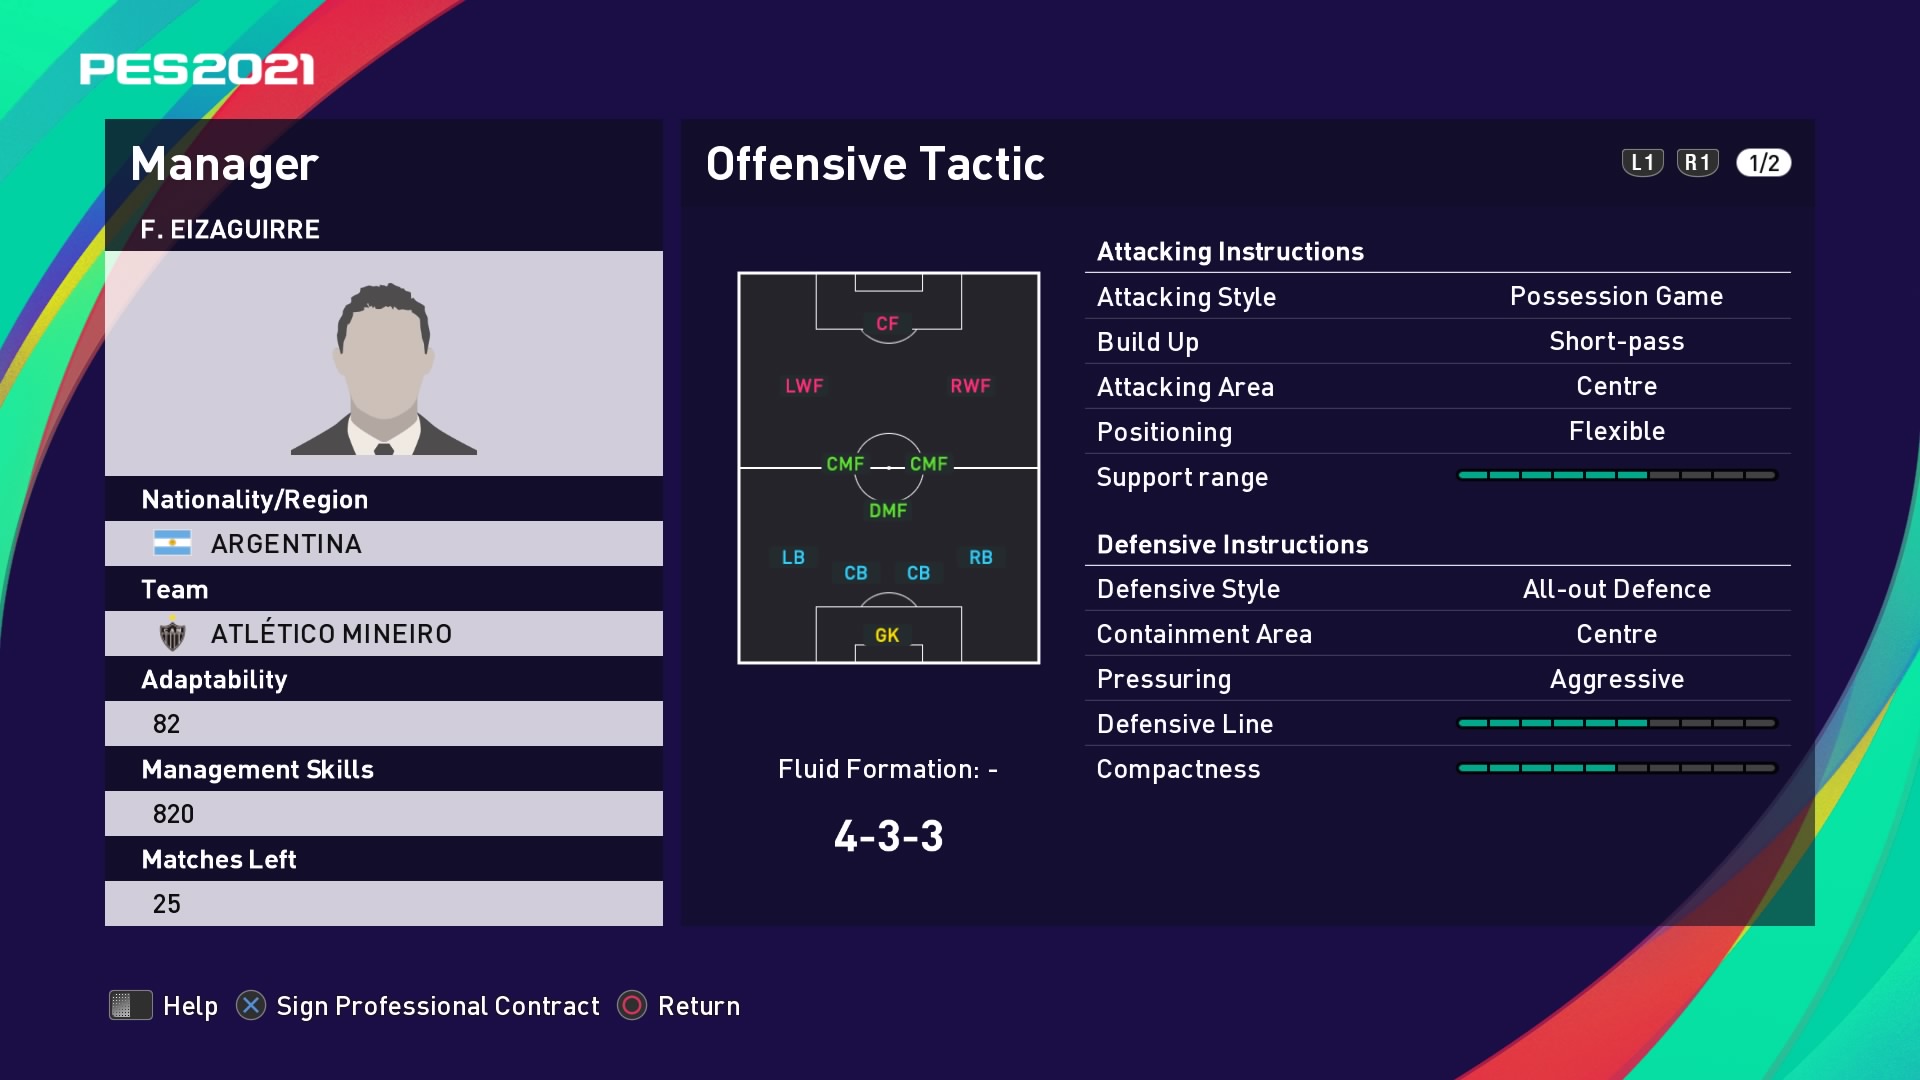 F. Eizaguirre (Jorge Sampaoli) Offensive Tactic in PES 2021 myClub